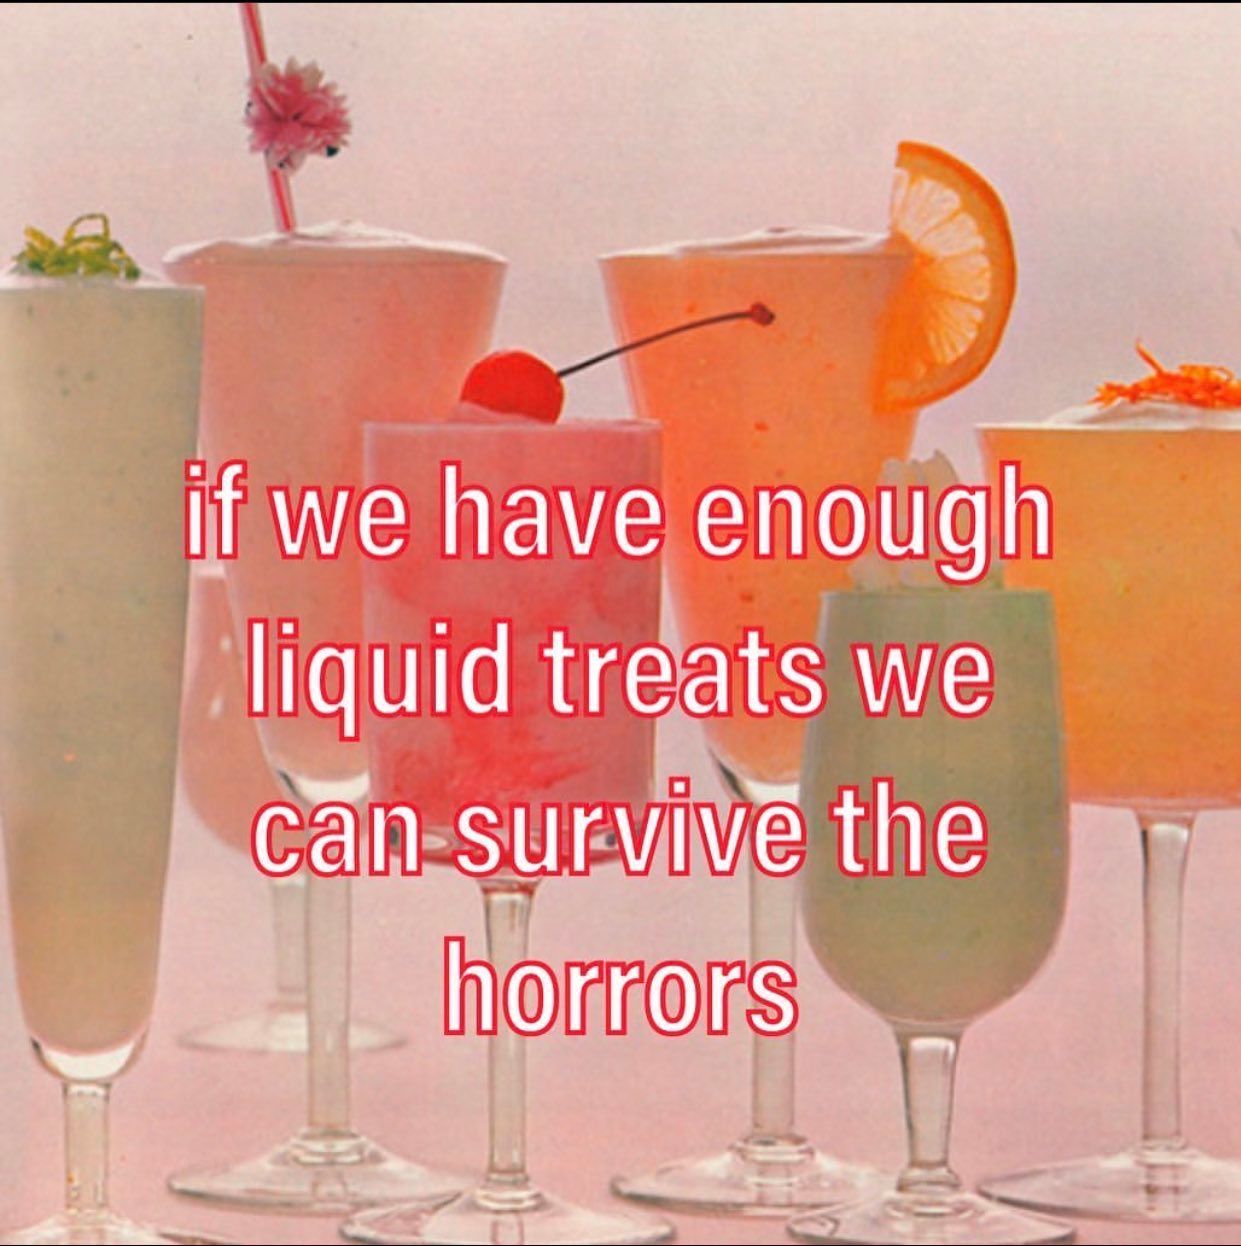 A 70s looking picture of fruity cocktails, with the caption: "If we have enough liquid treats we can survive the horrors."